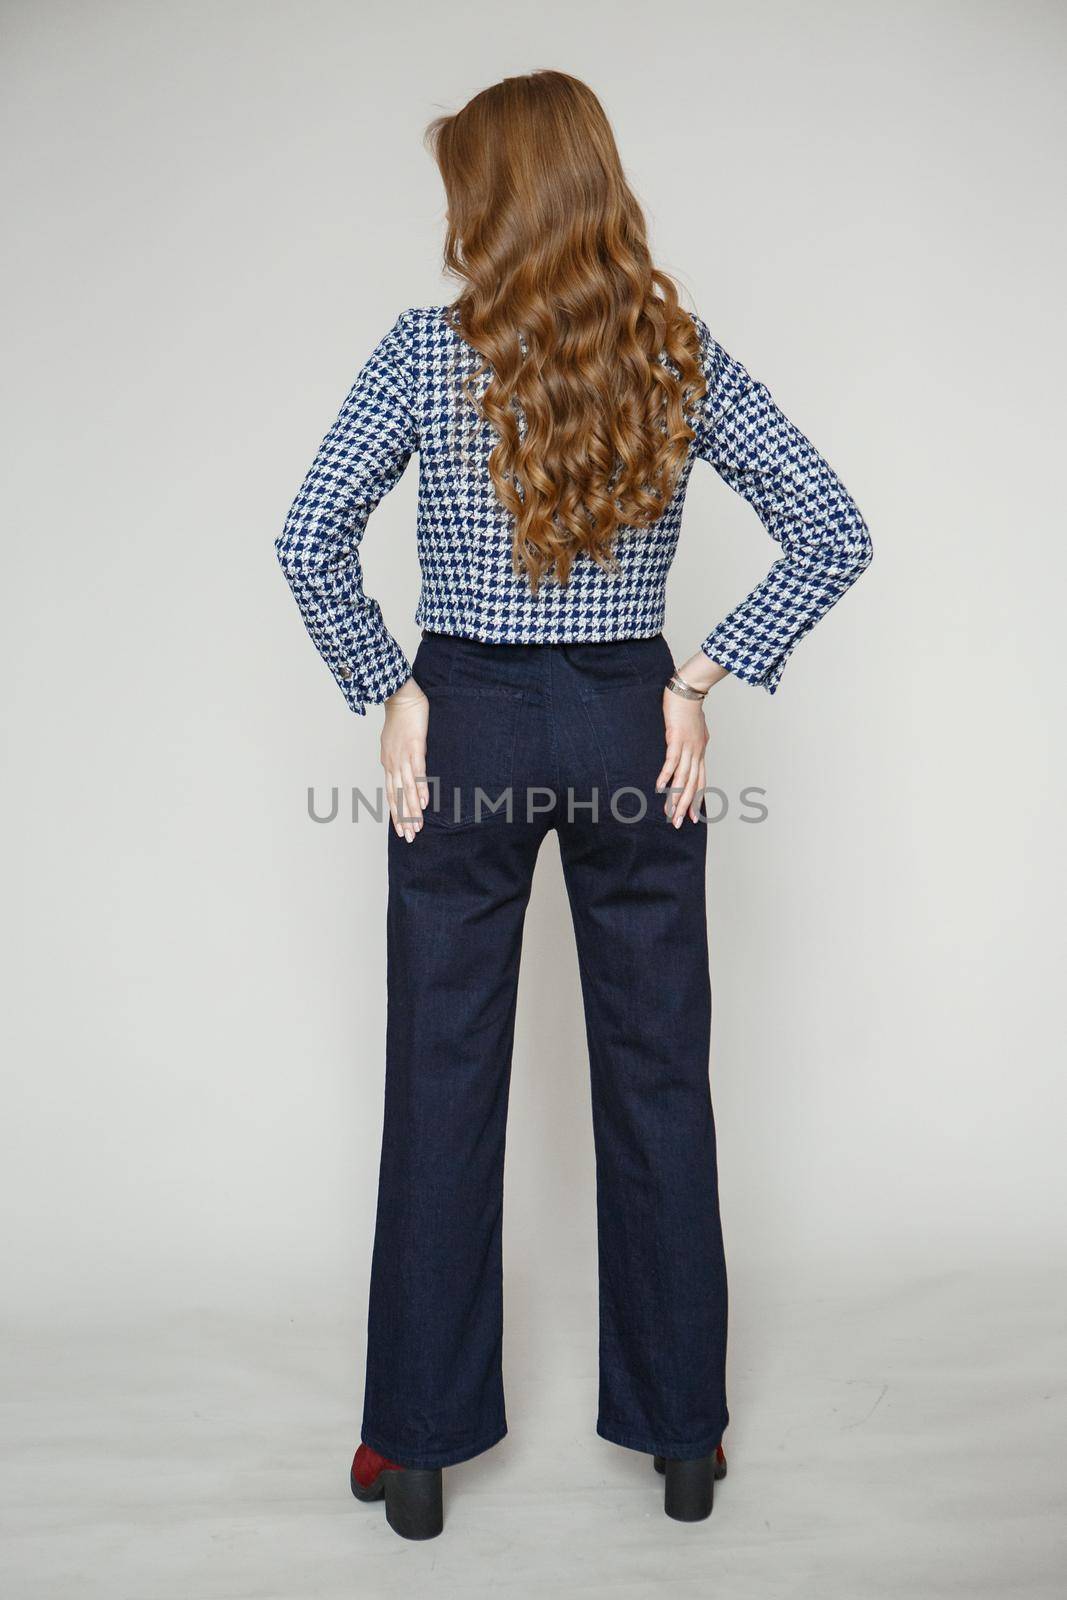 A girl in a denim suit standing on a studio background. A model in a blue suit